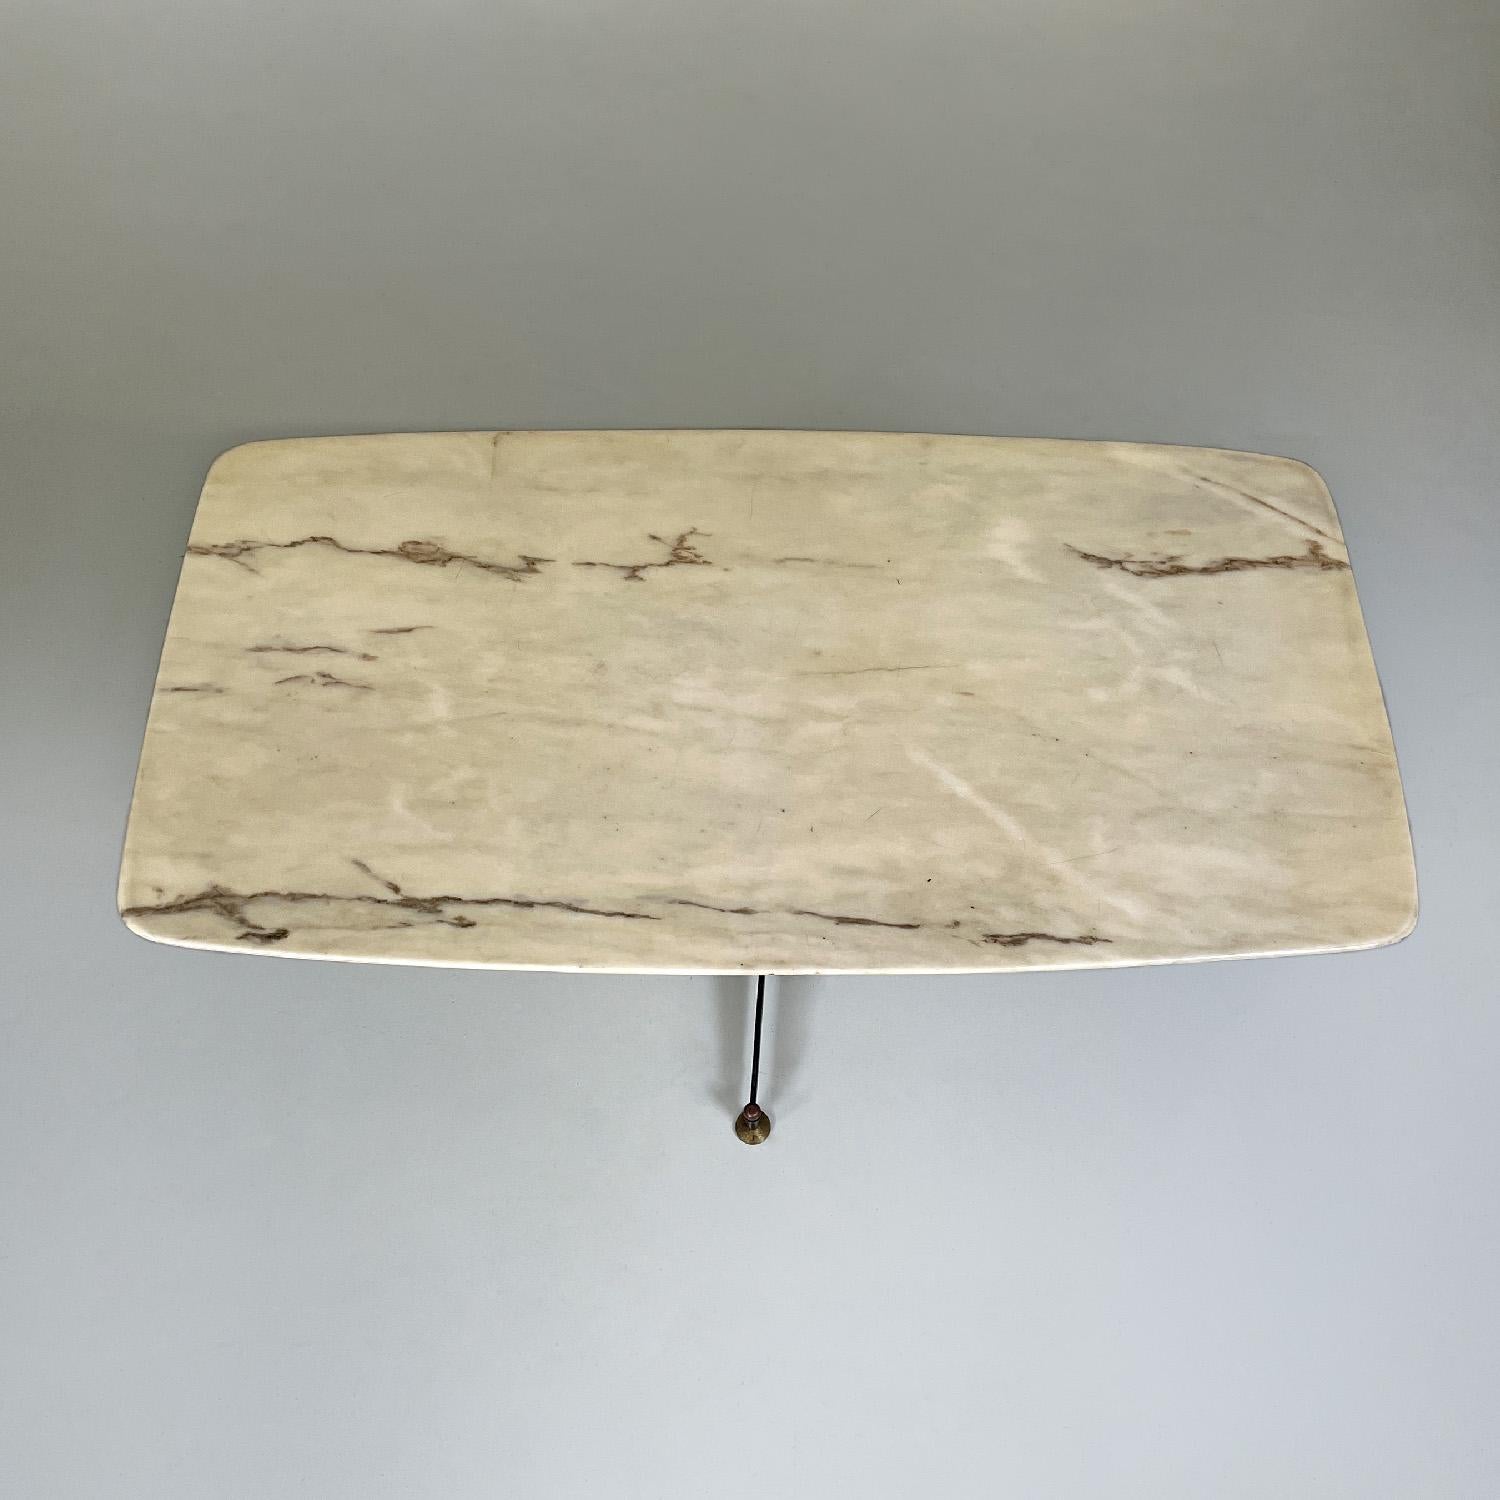 Metal Italian mid-century modern coffee table with marble top, 1950s For Sale